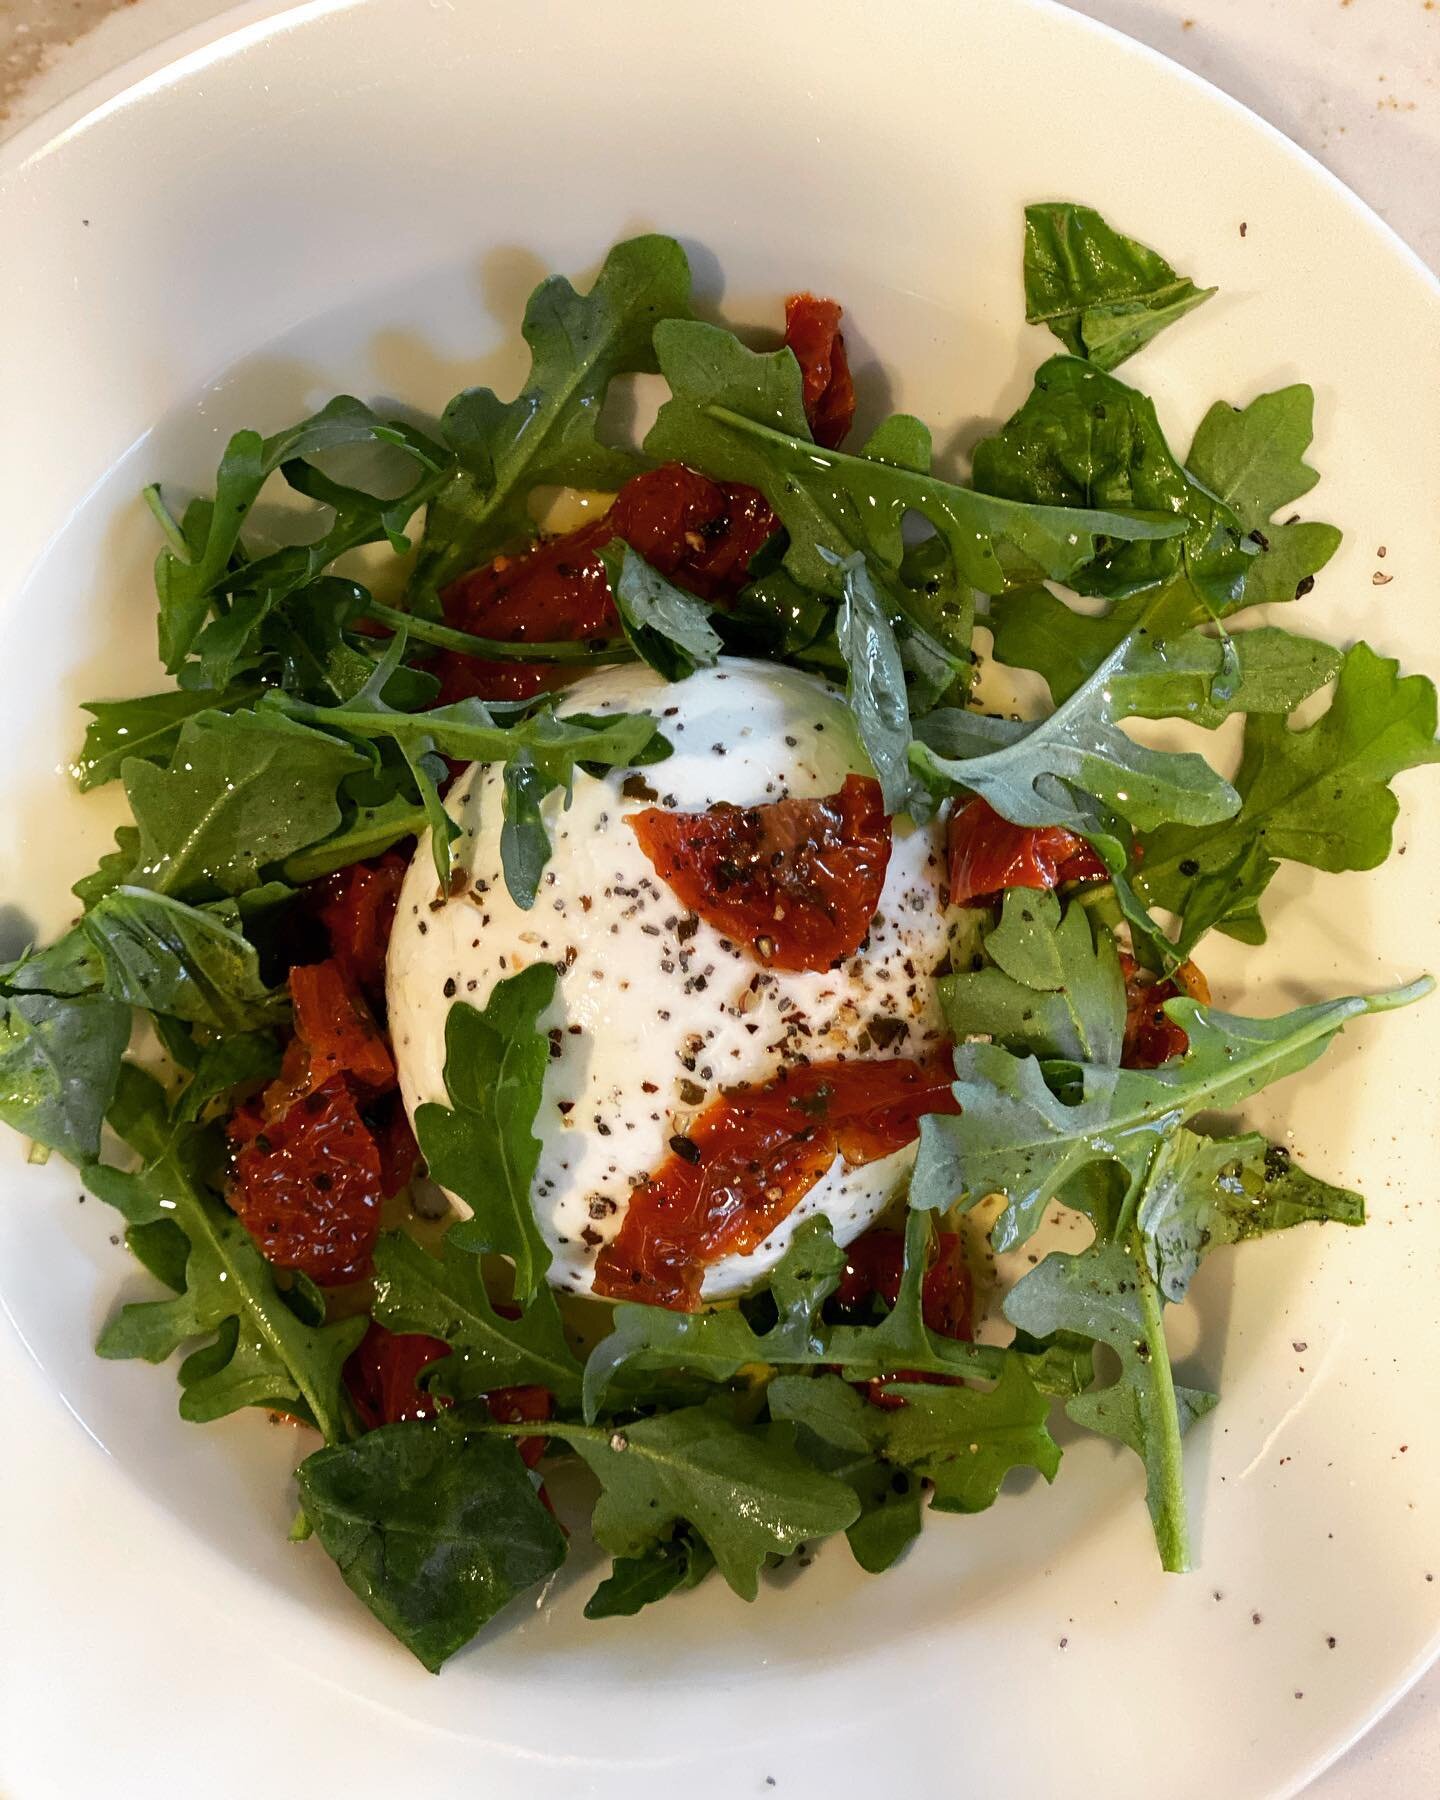 Burrata for the weekend? We have it!#cheese #cheeselover #burrata #burratalovers #creamy #tomatoes #sundriedtomatoes #arugula #salad #appetizer #summerweather #shoplocal #shopsmallbusiness #shopsmall